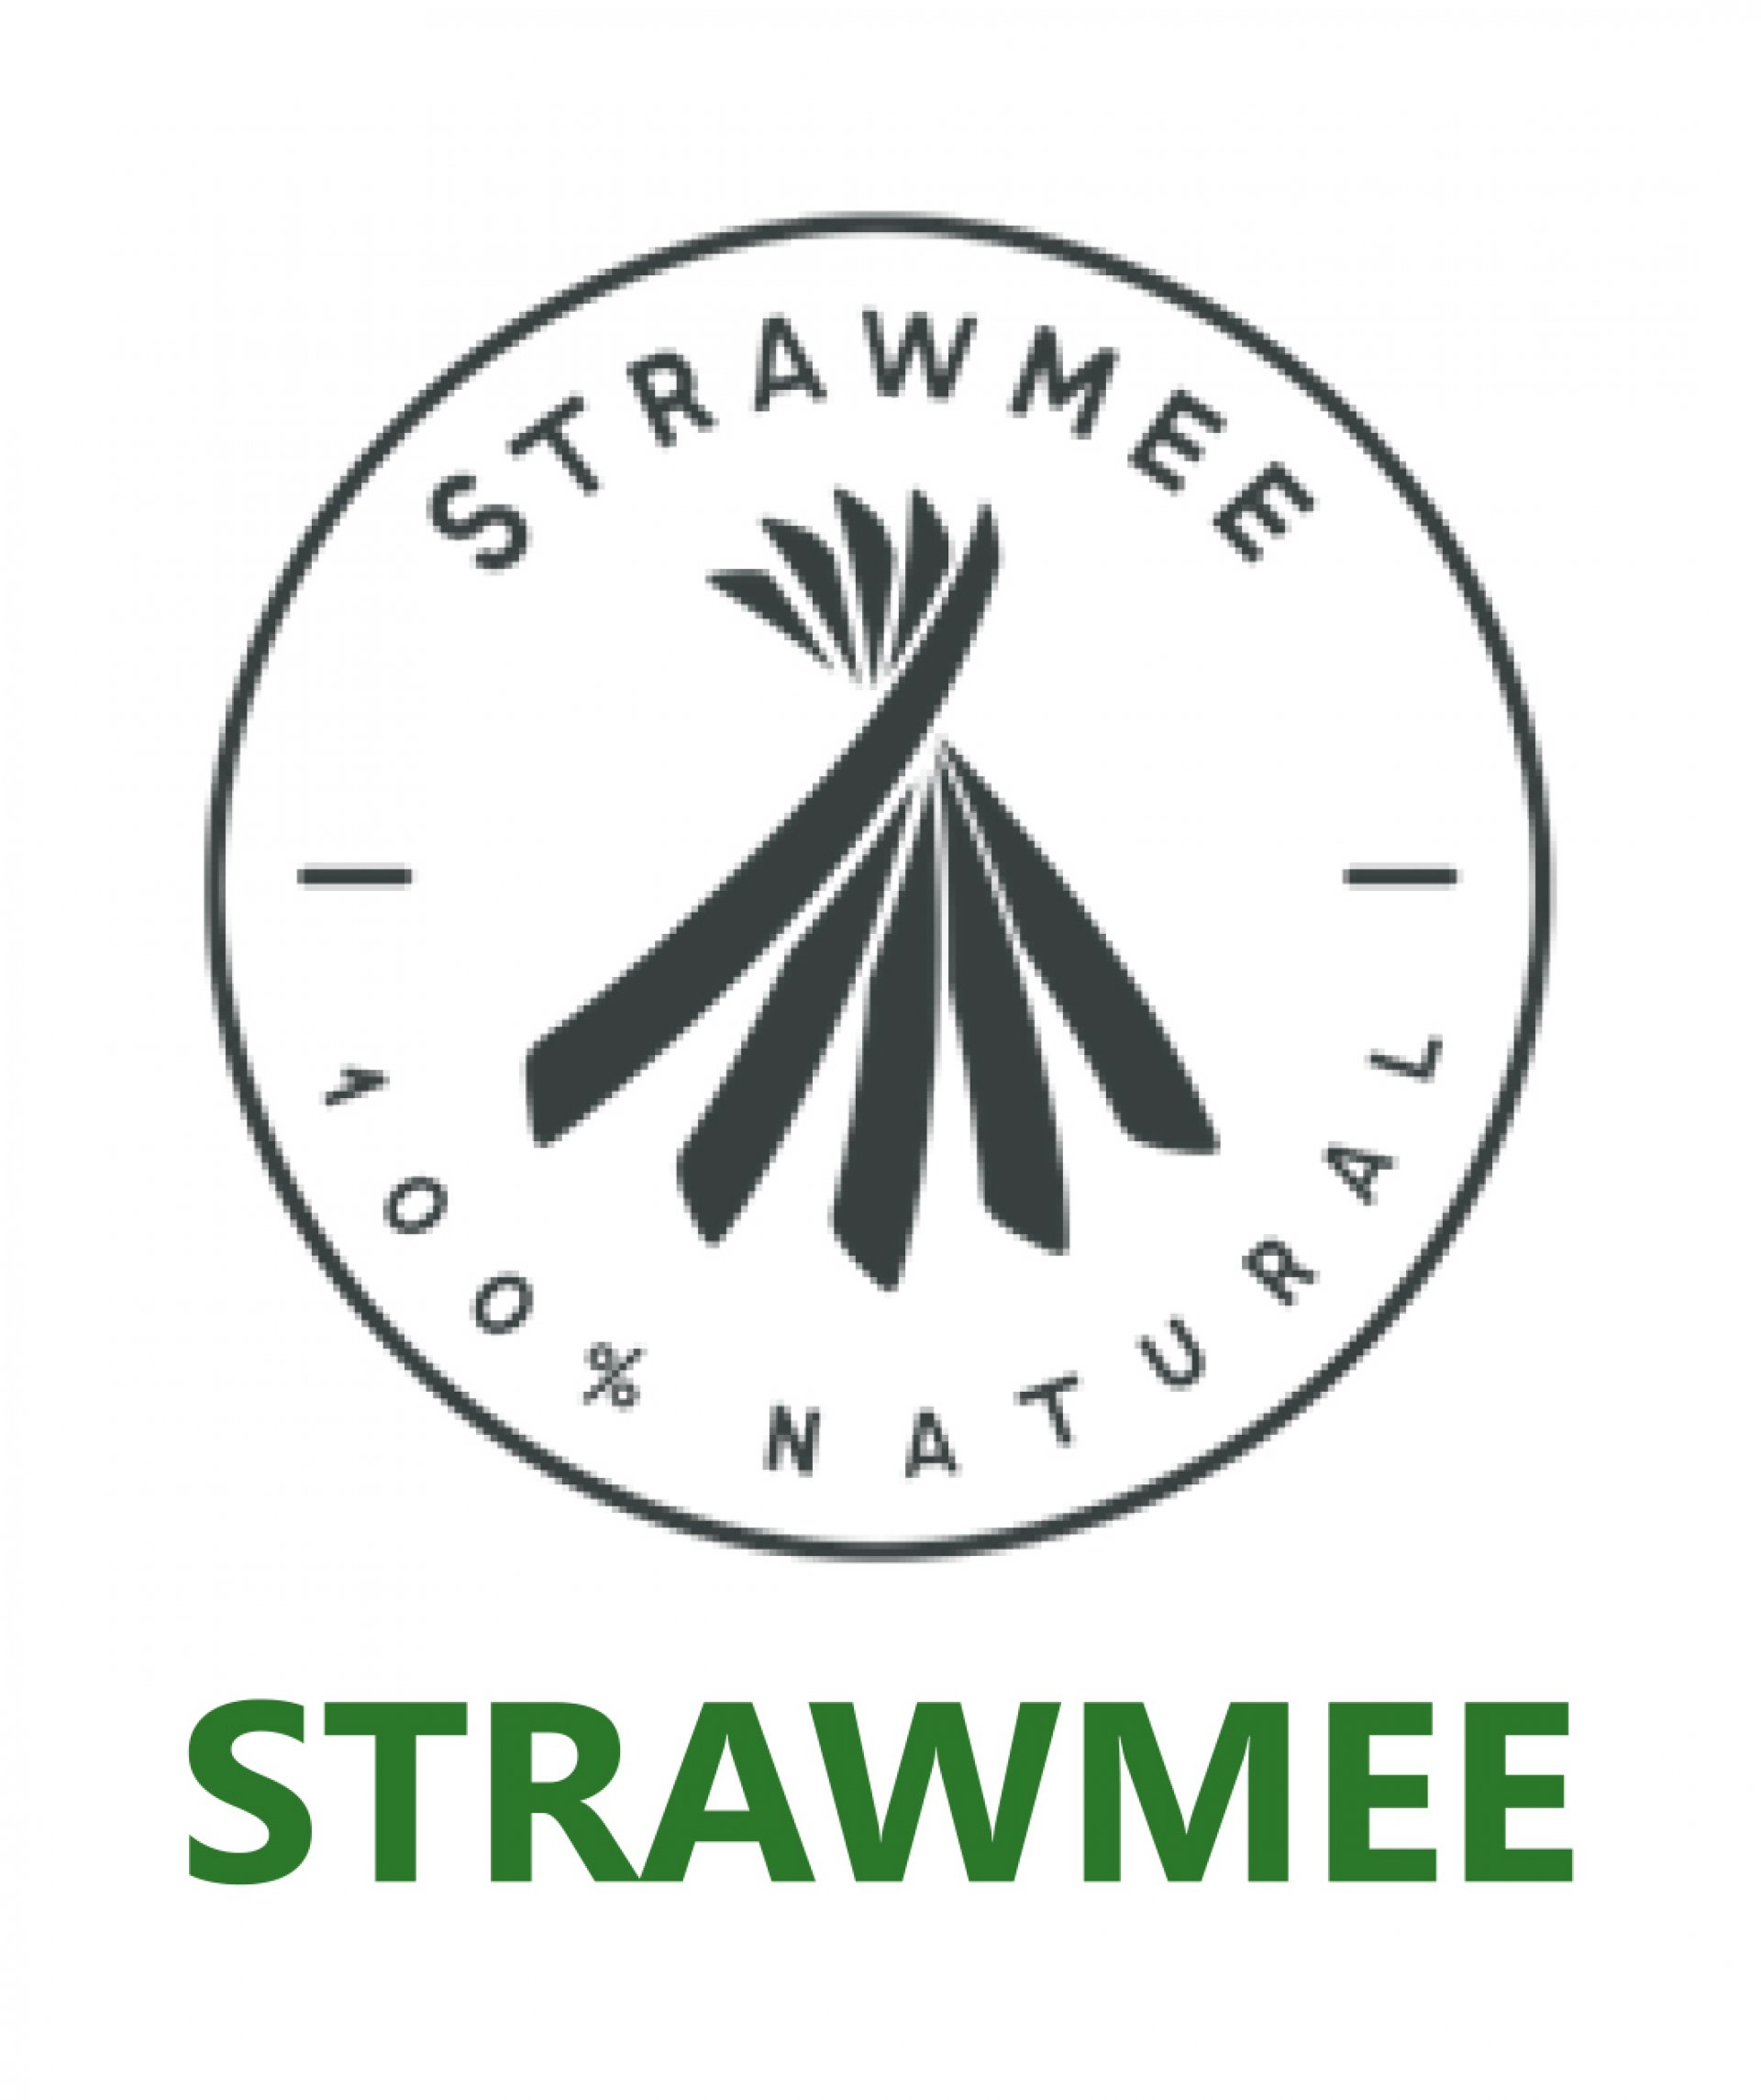 STRAWMEE  from Germany